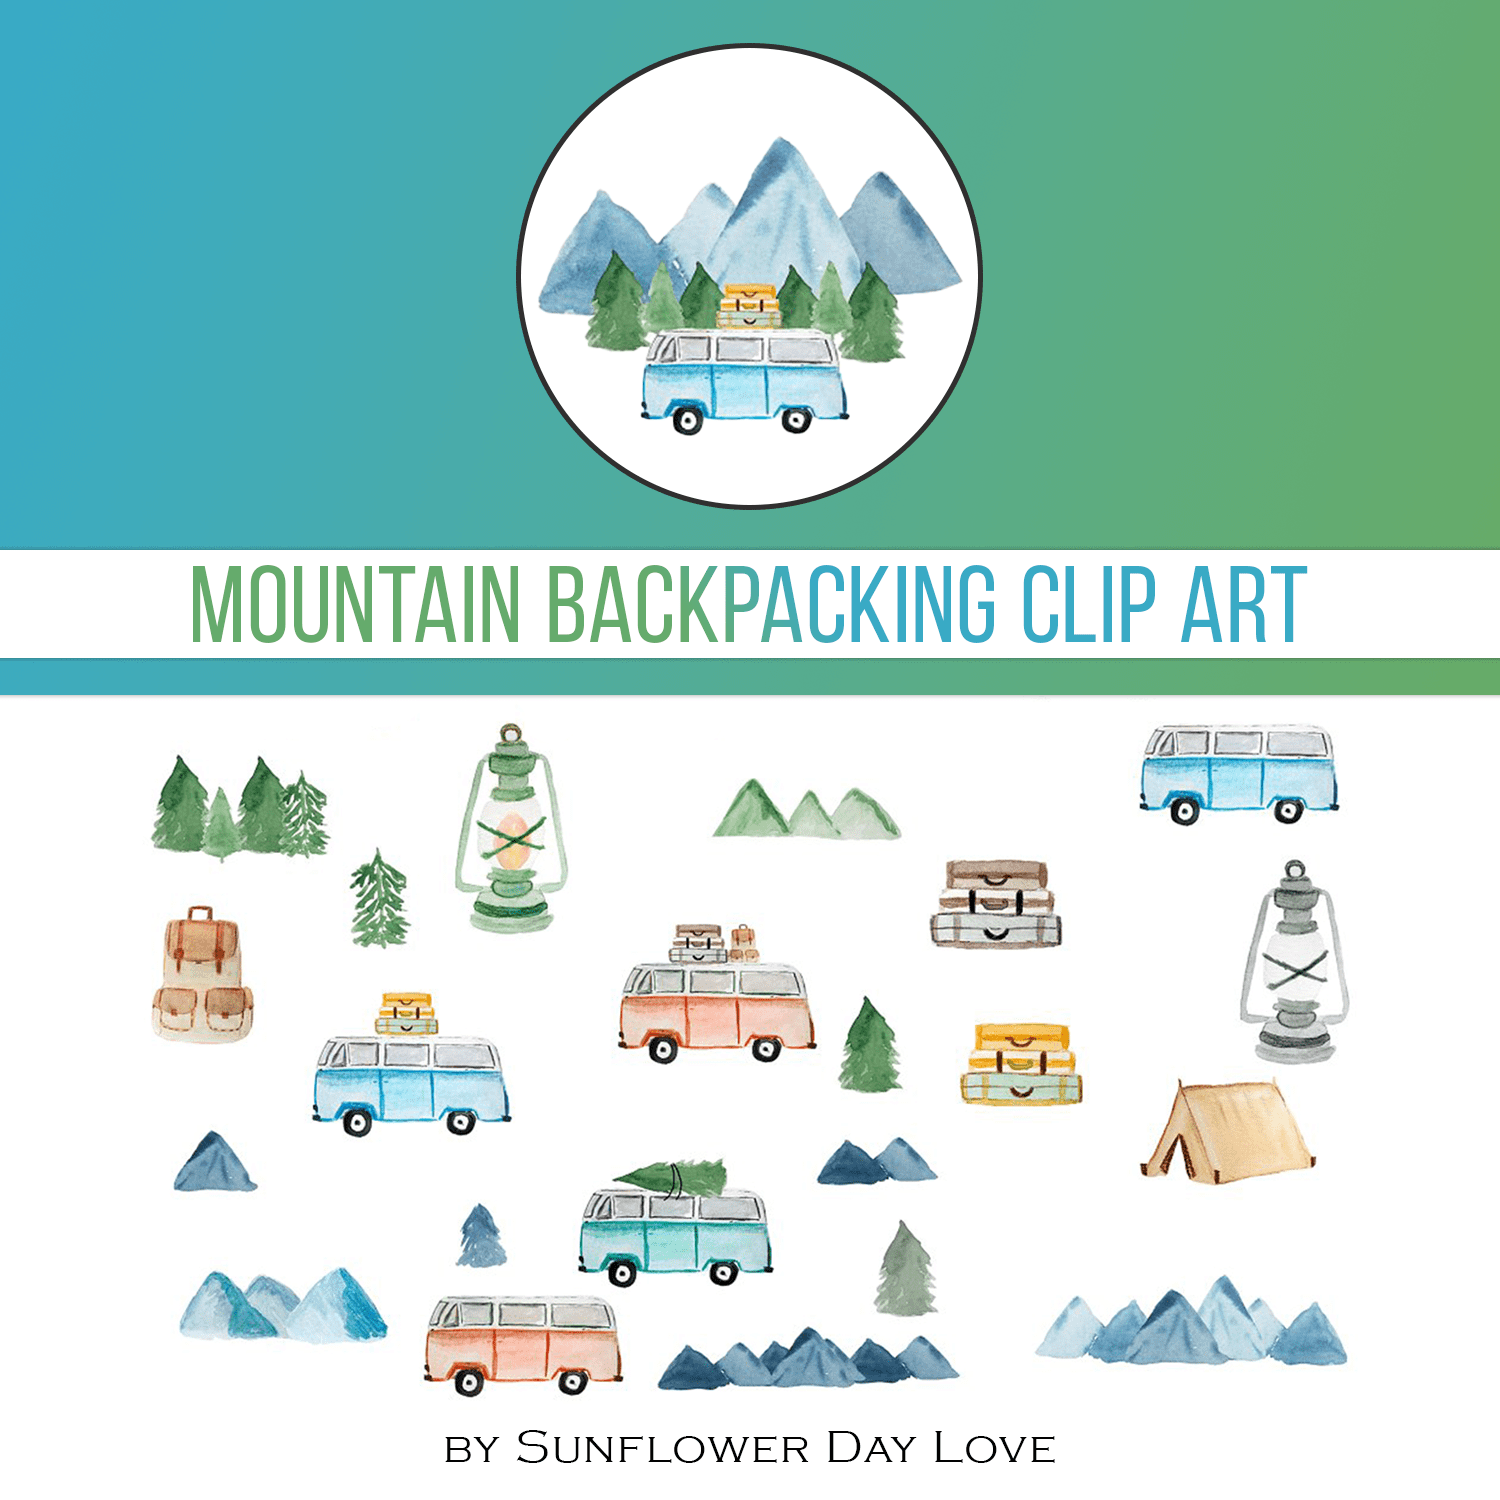 Mountain Backpacking Clip Art cover.